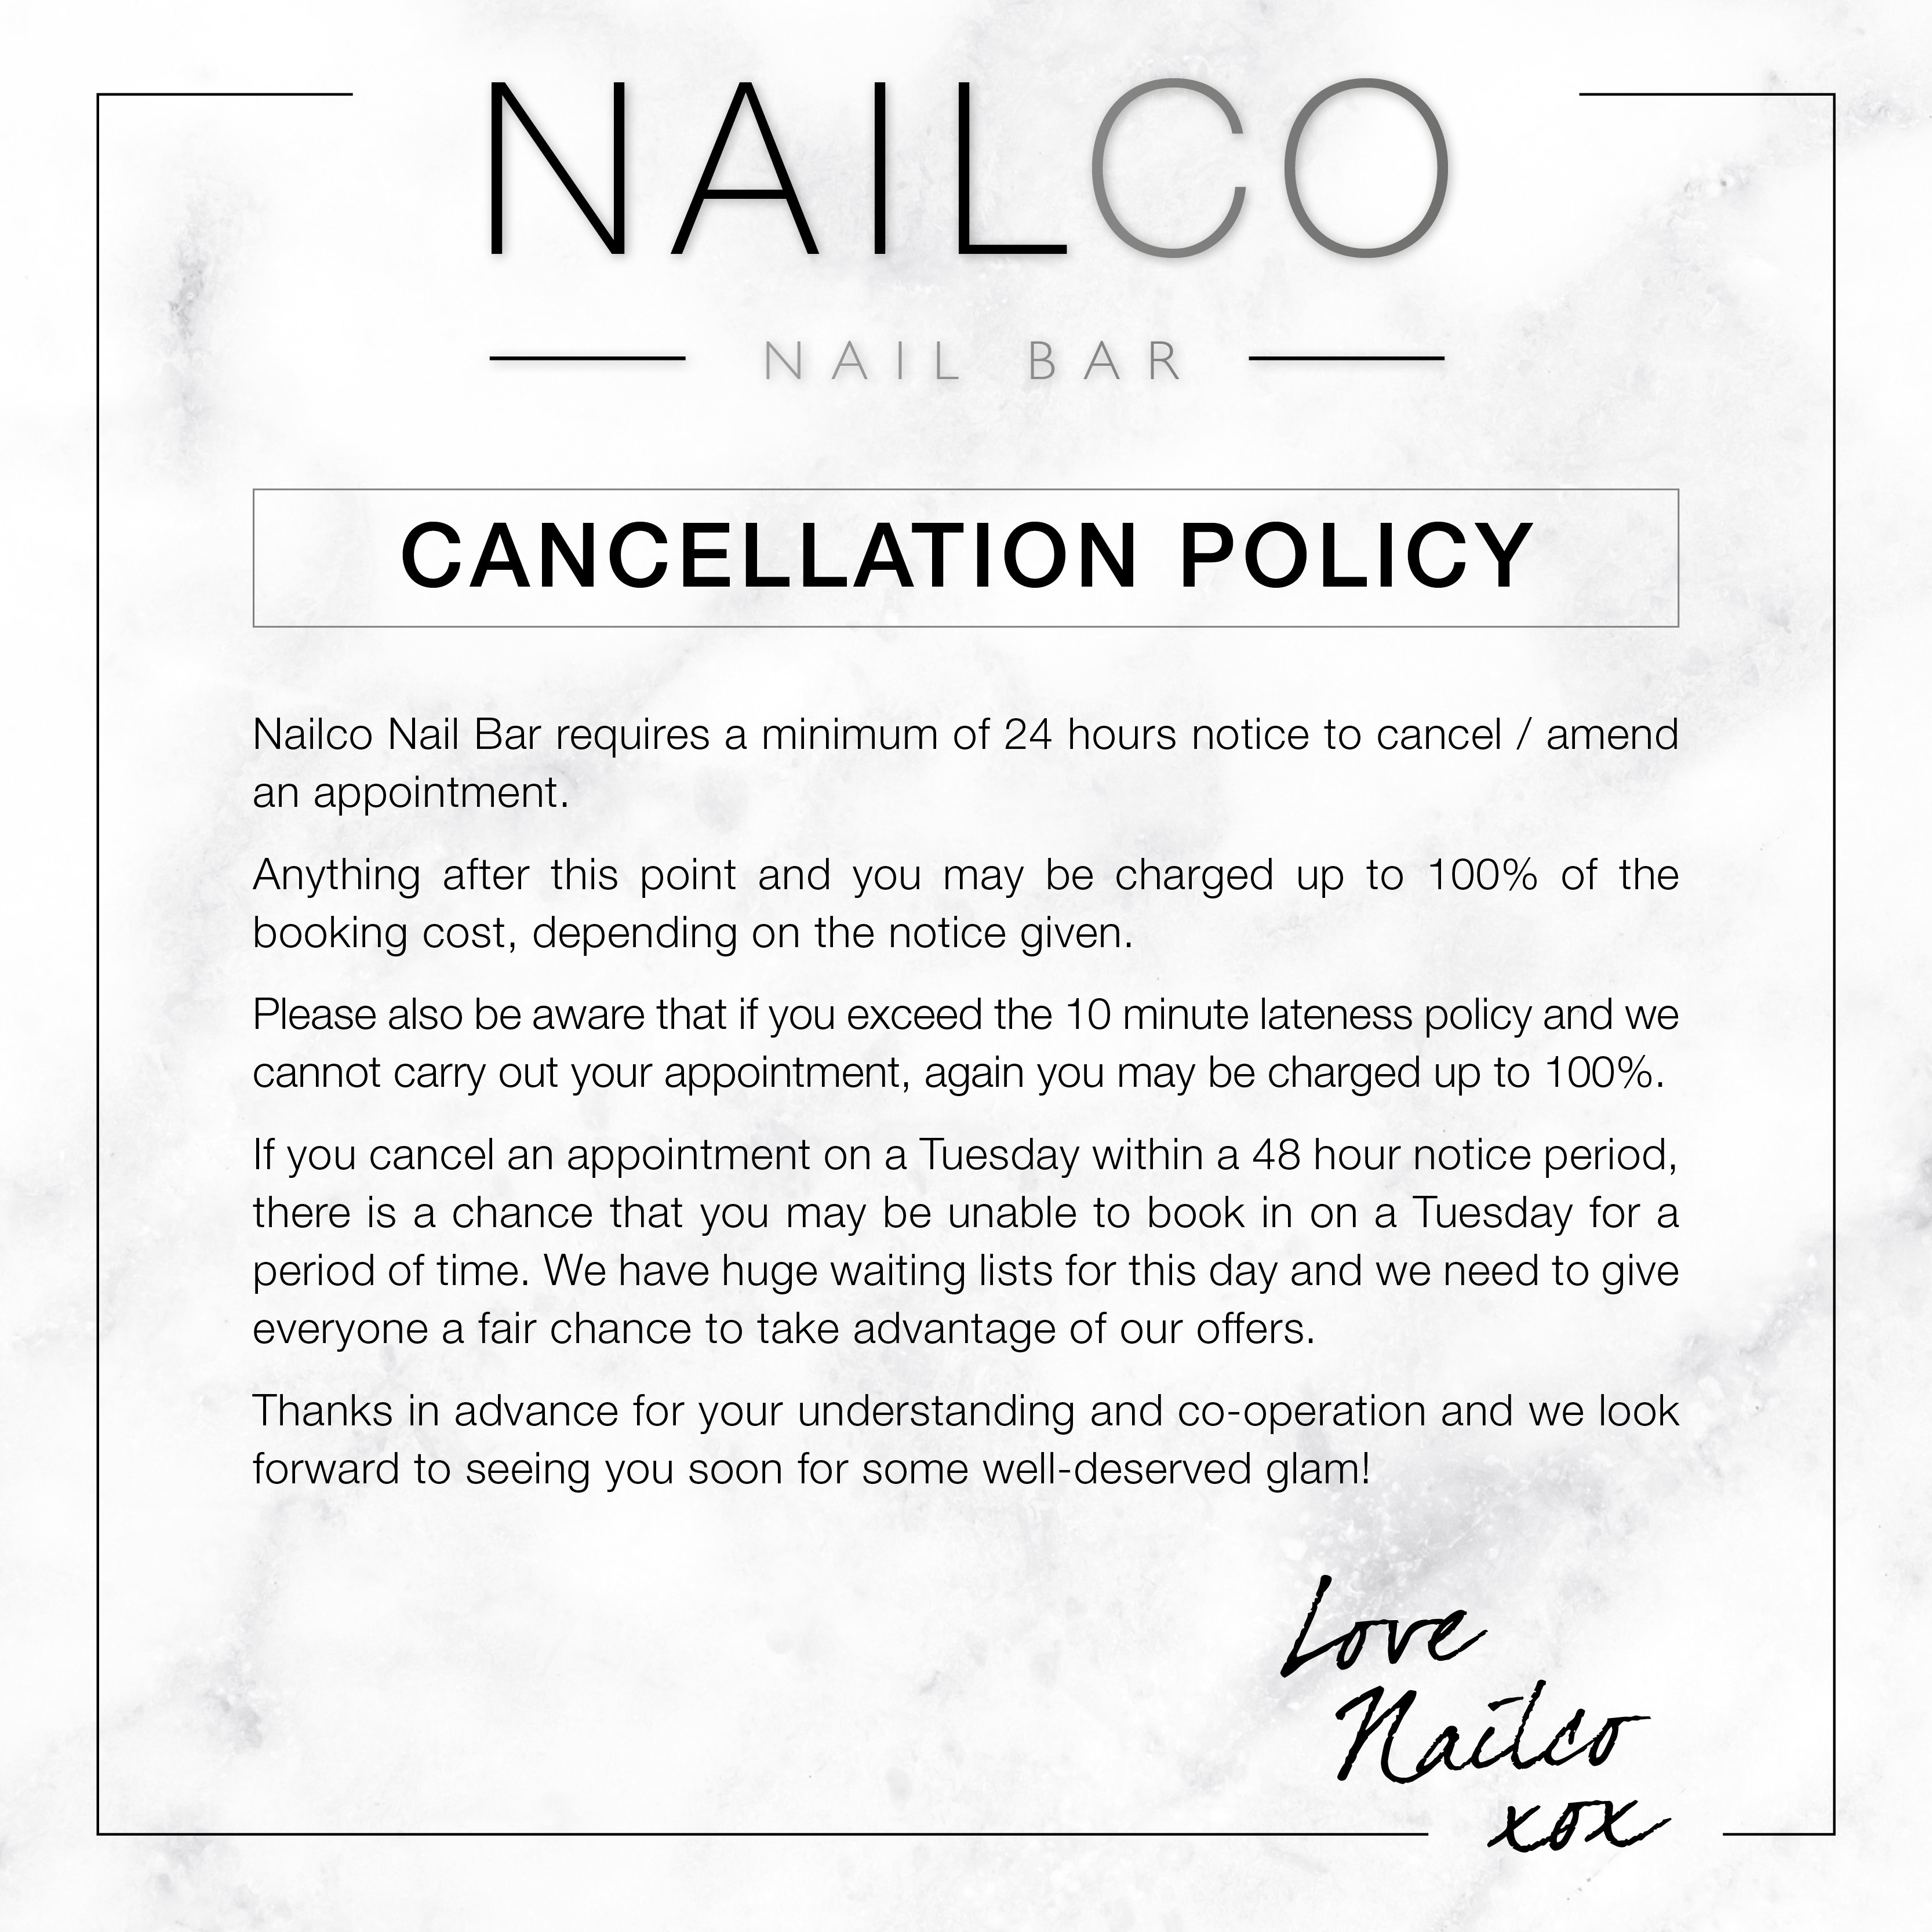 Glasgow's Best Luxury Nail Bar  Nailco Nailbar intended for Salon Cancellation Policy Template